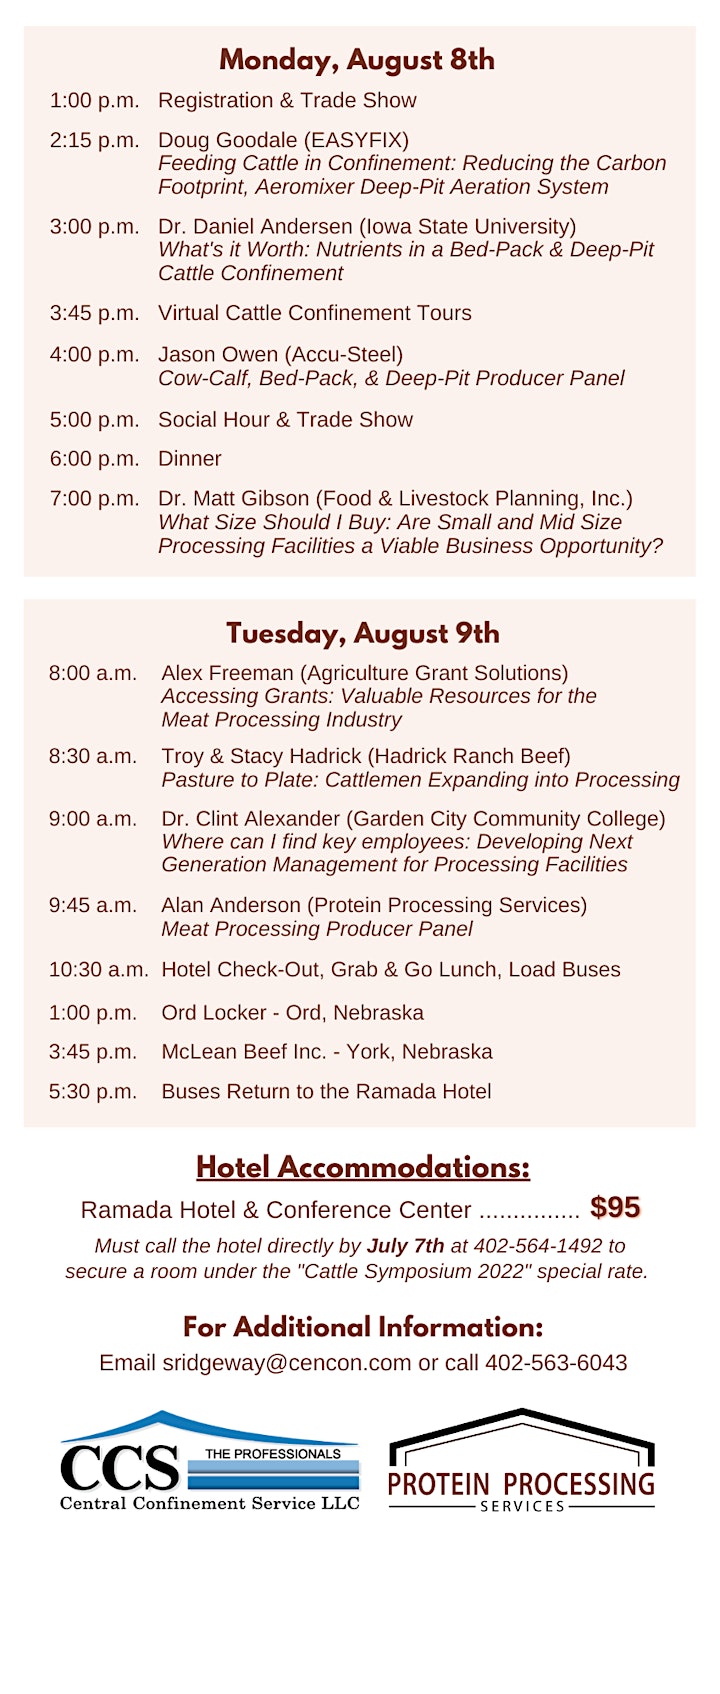 Midwest Cattle Confinement & Beef Processing Symposium image